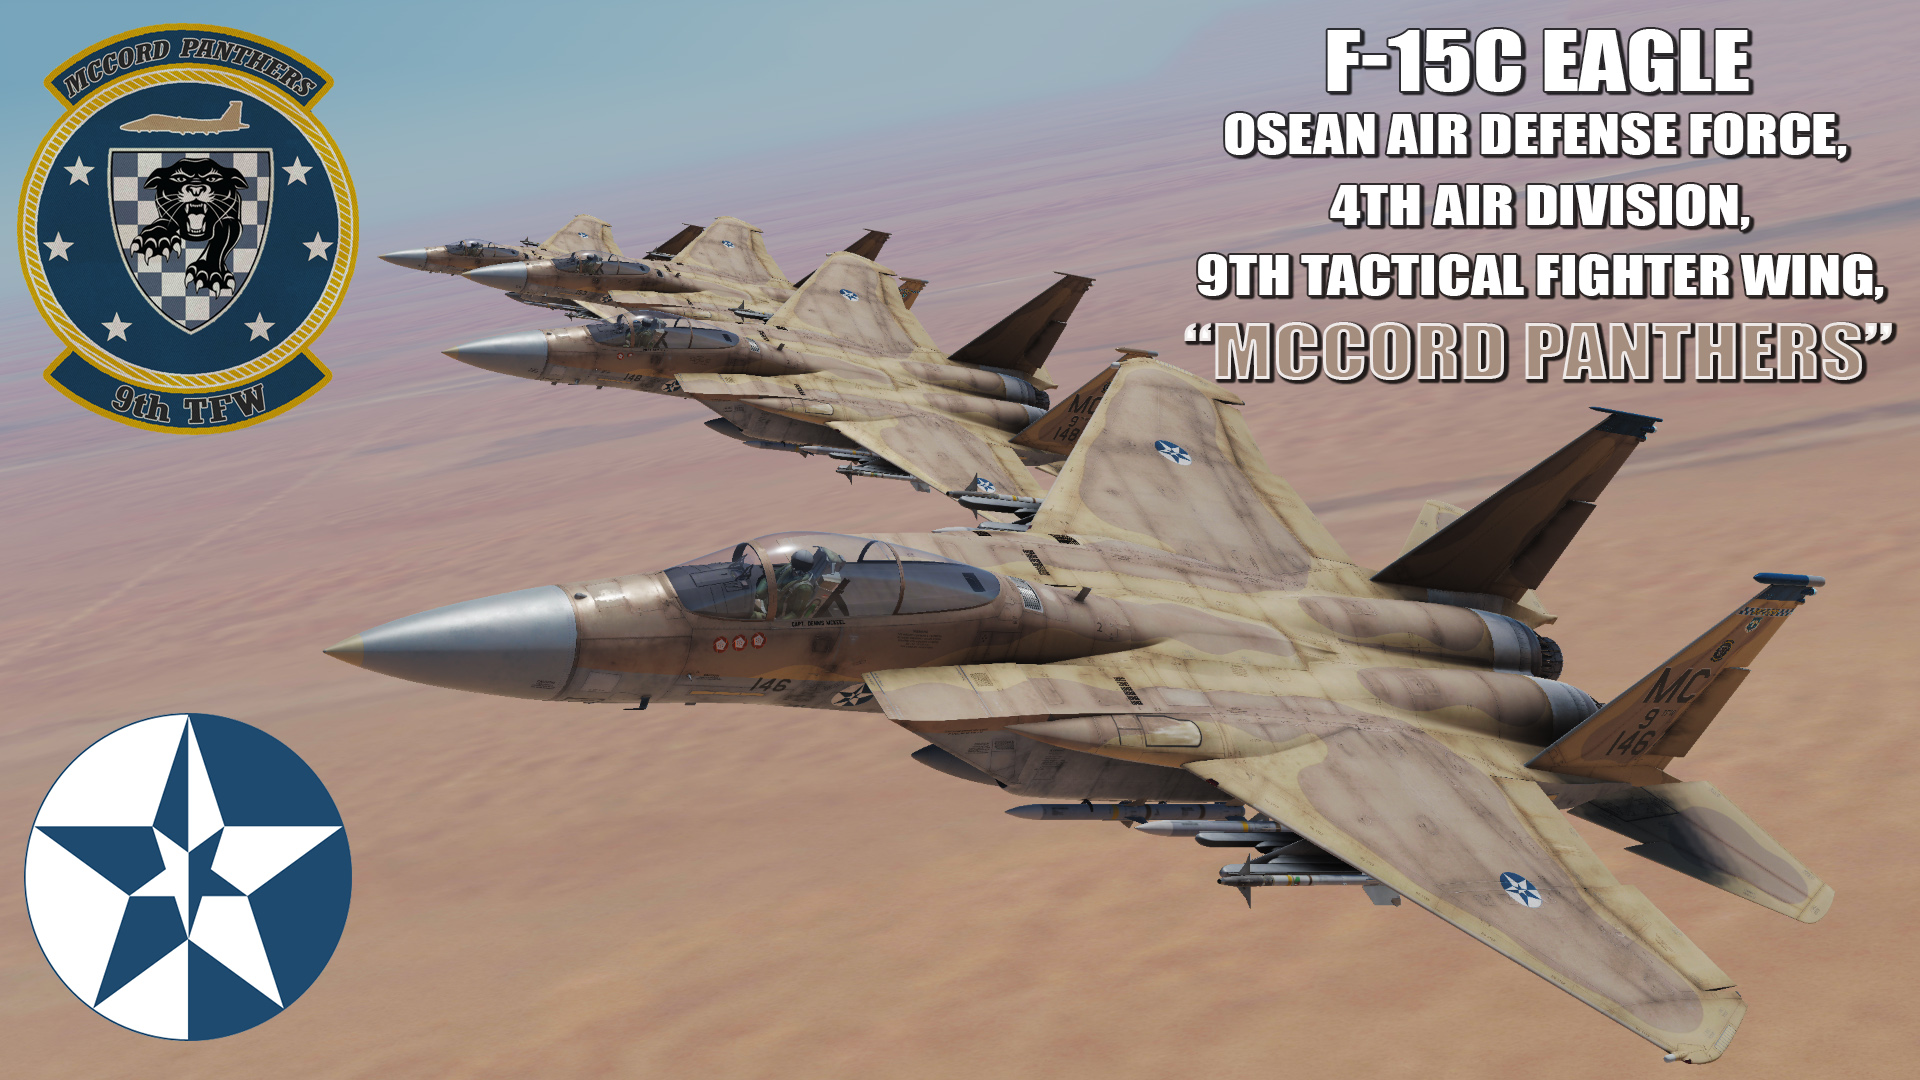 Ace Combat - Osean Air Defense Force 4th Air Division, 9th TFW "Mccord Panthers" F-15C Eagle